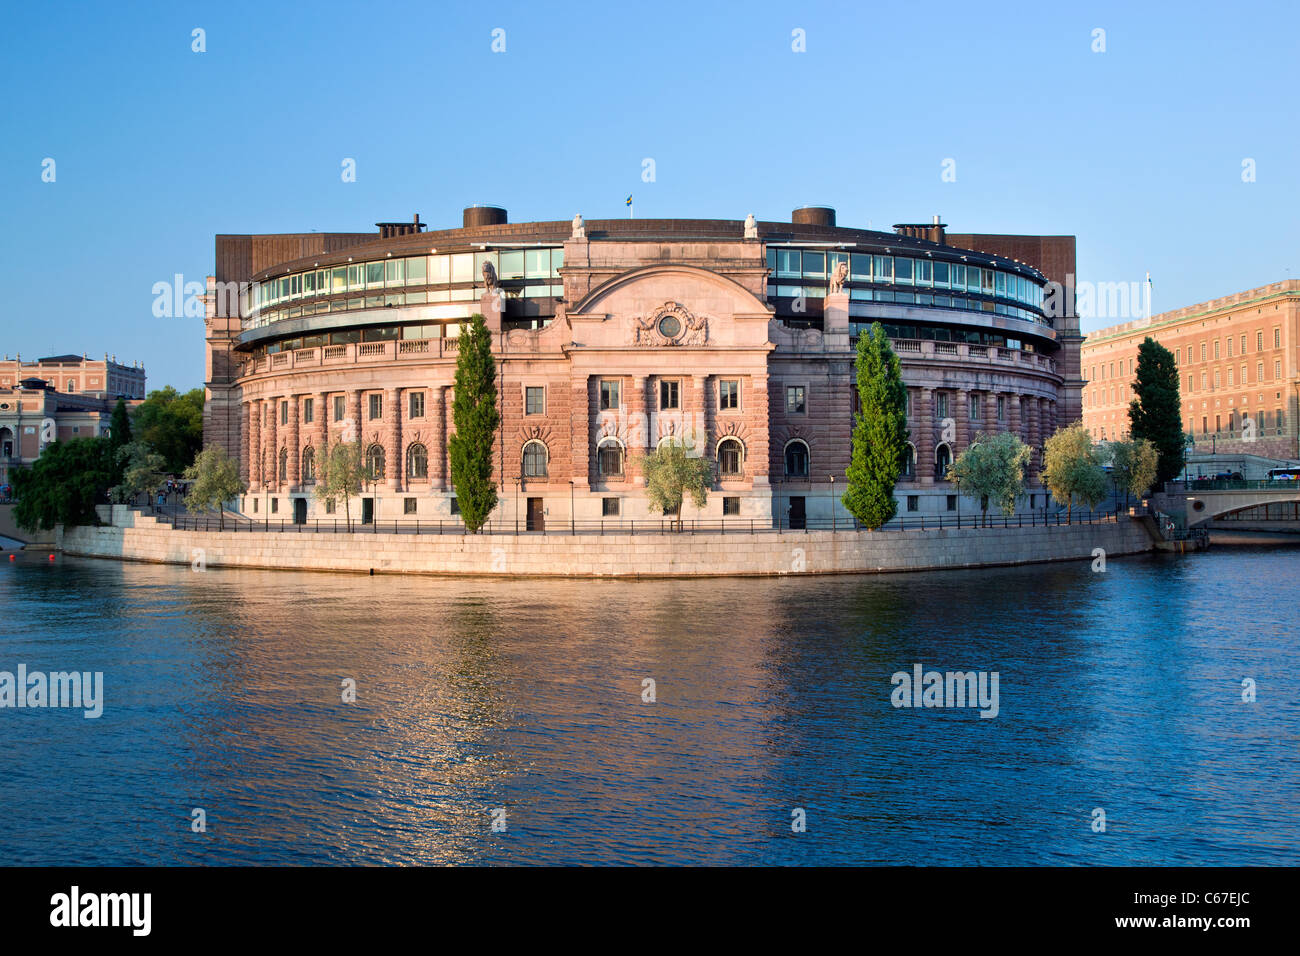 Parliament building (Parliament House / Riksdagshuset) in Stockholm, Sweden. Exterior, waterfront view Stock Photo